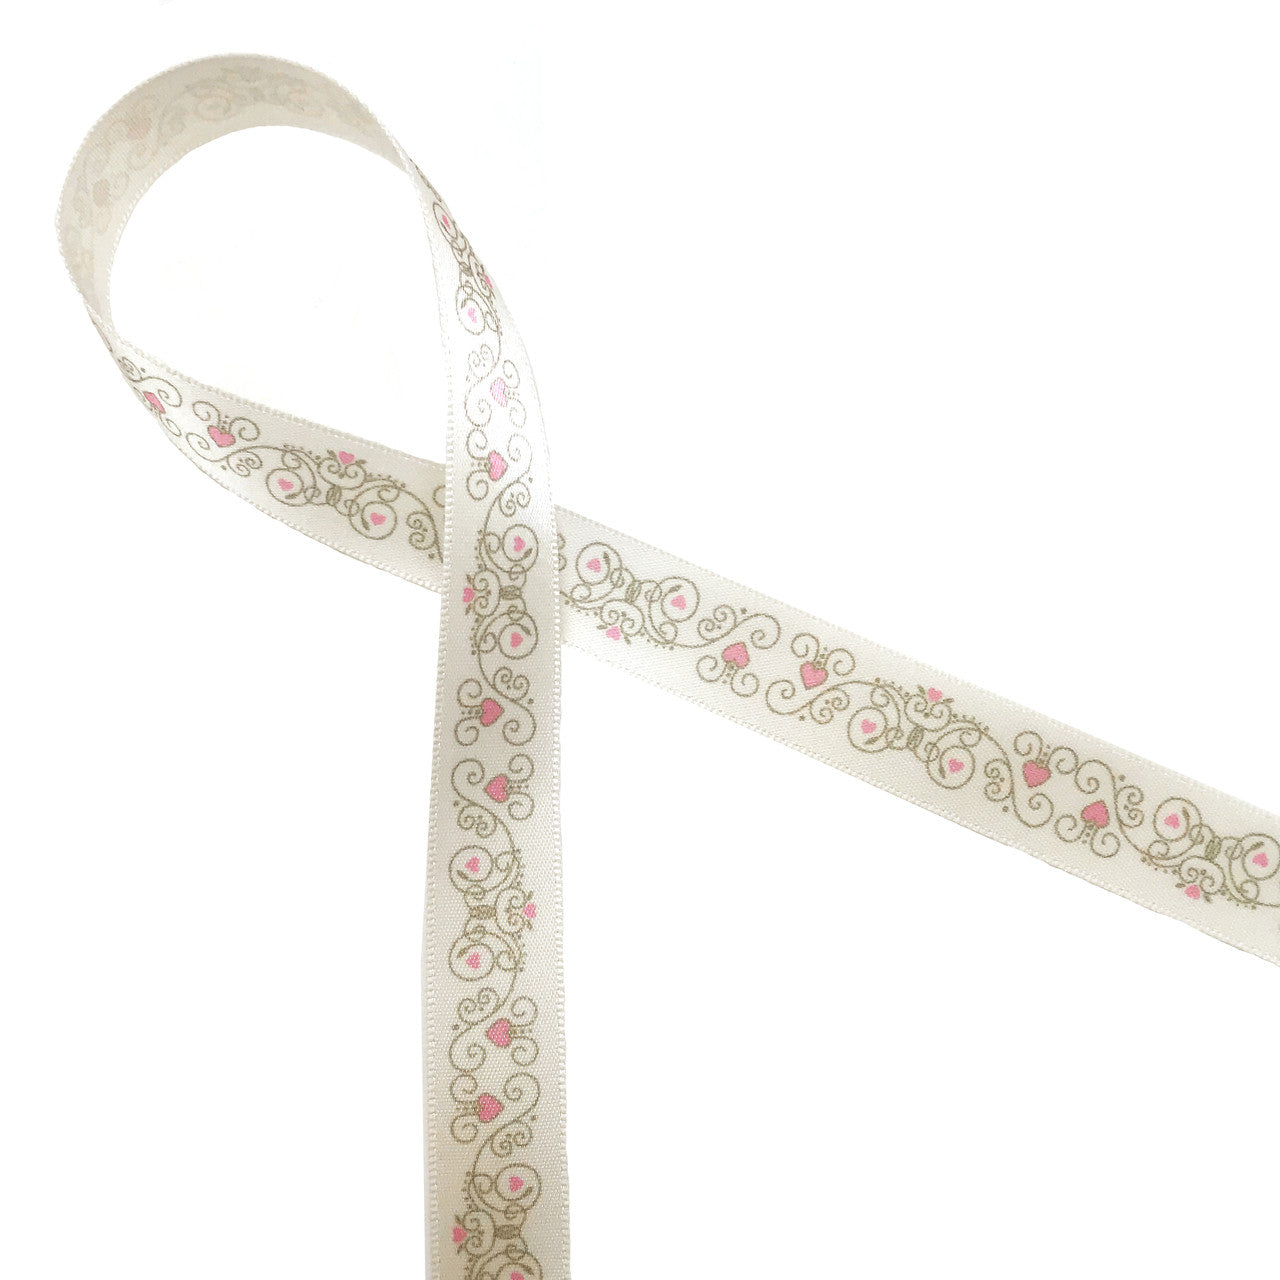 Scrolls Ribbon in champagne Gold  accented with Pink hearts printed on 5/8" Antique White Single Face Satin ribbon